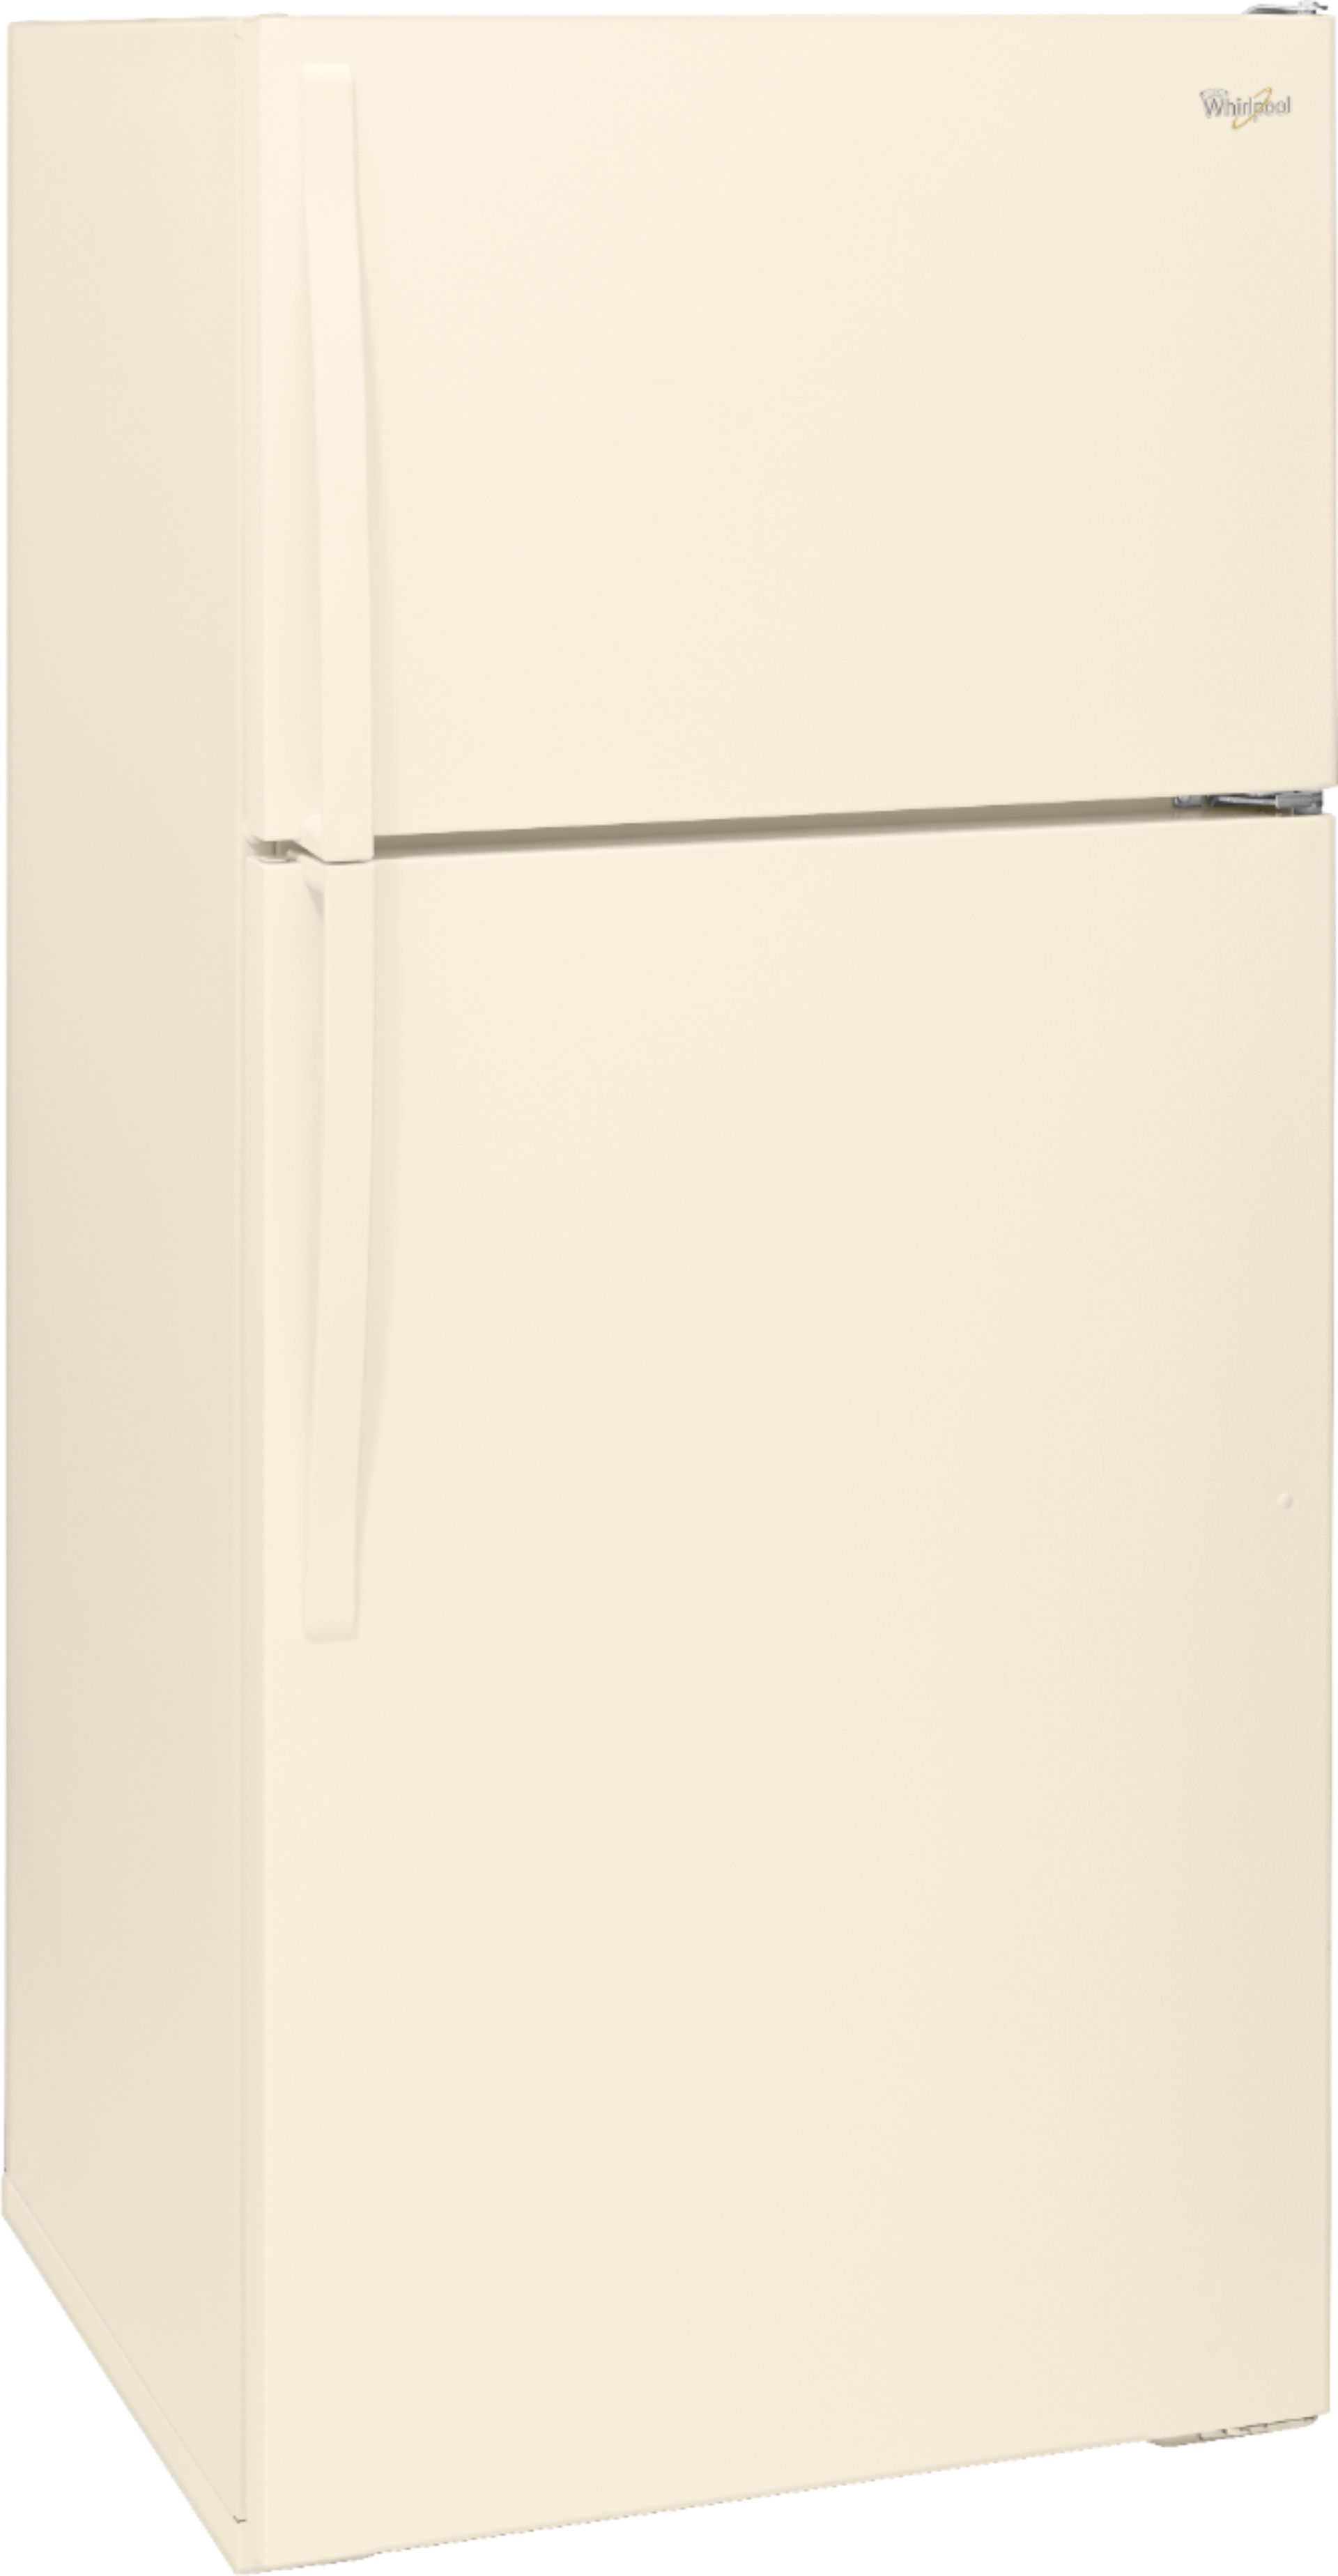 Angle View: Whirlpool - 14.3 Cu. Ft. Top-Freezer Refrigerator - Biscuit